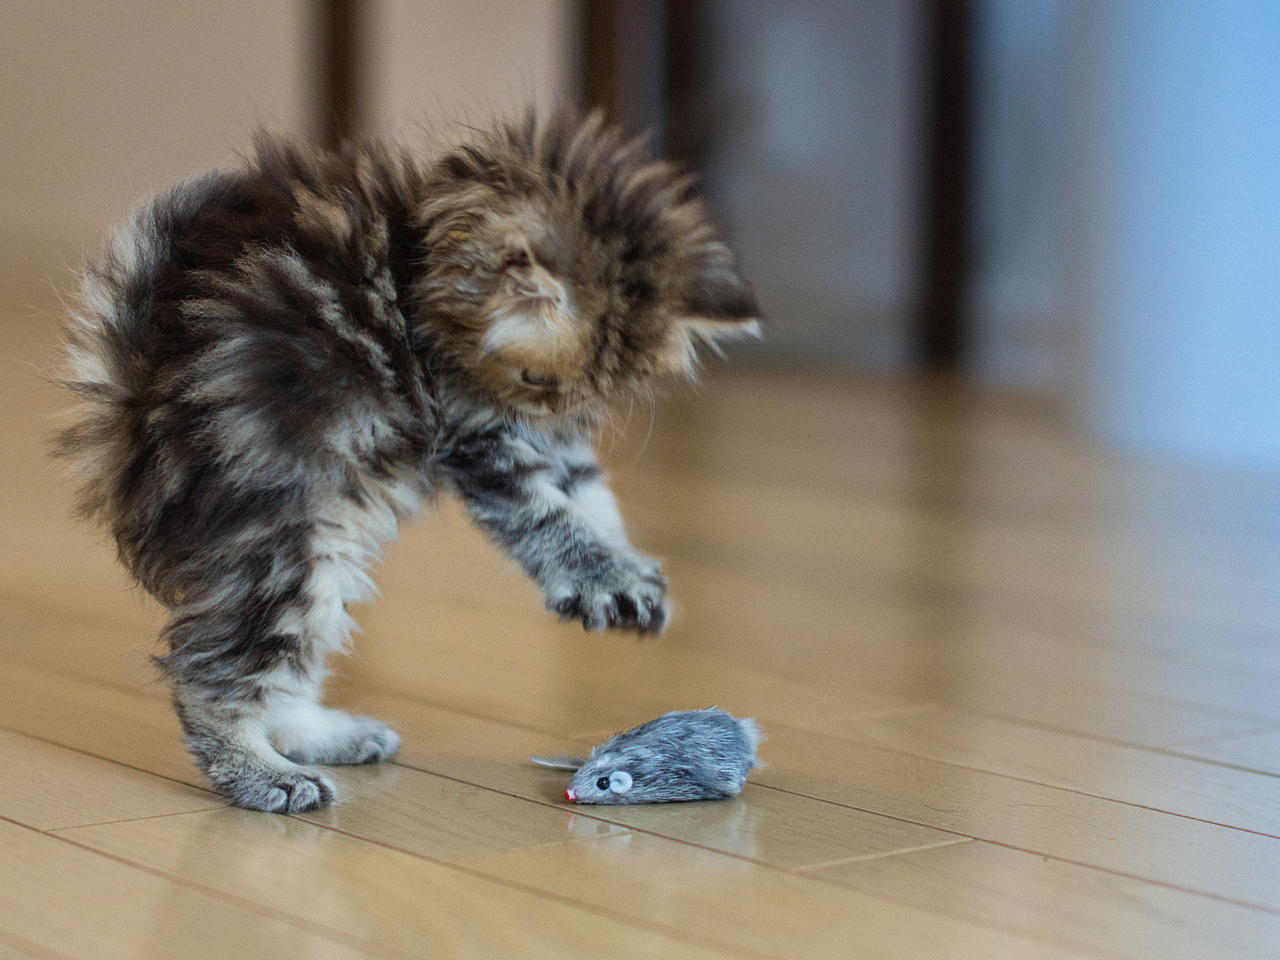 Funny Kitten Playing With Toy Mouse wallpaper 1280x960